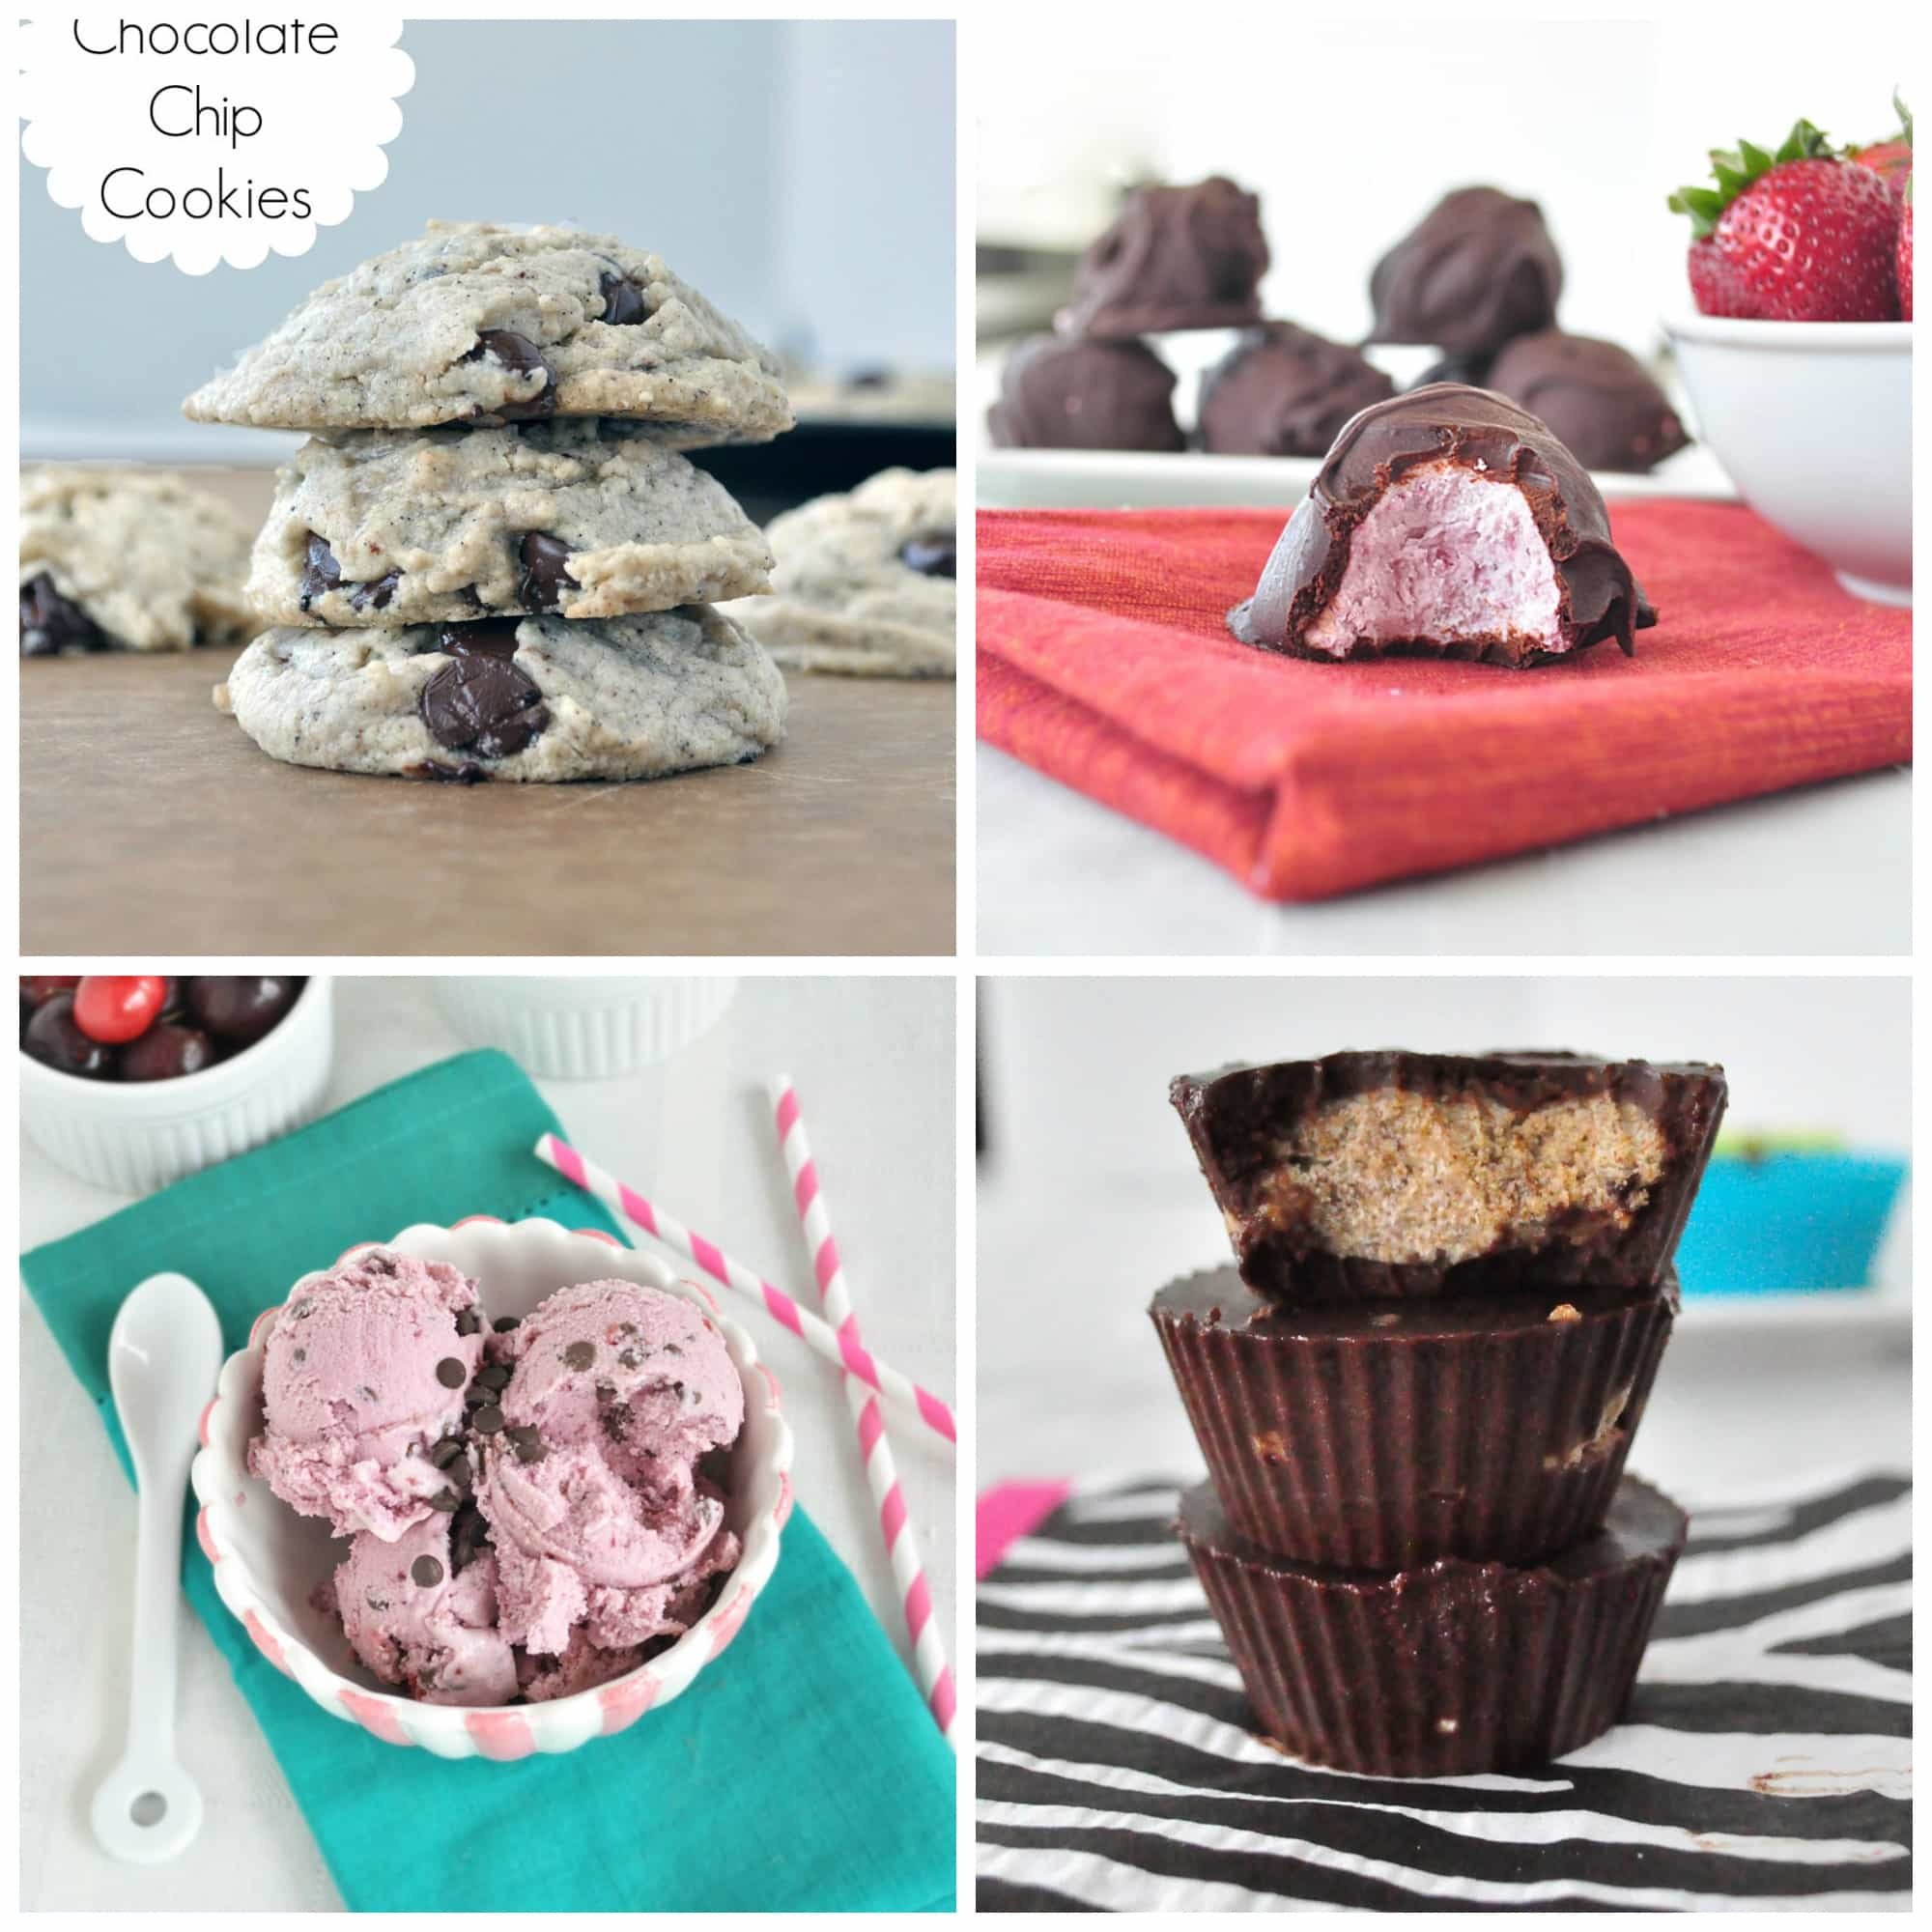 Healthy Sweet Desserts
 20 Healthy Dessert Recipes with 5 Ingre nts or Less My